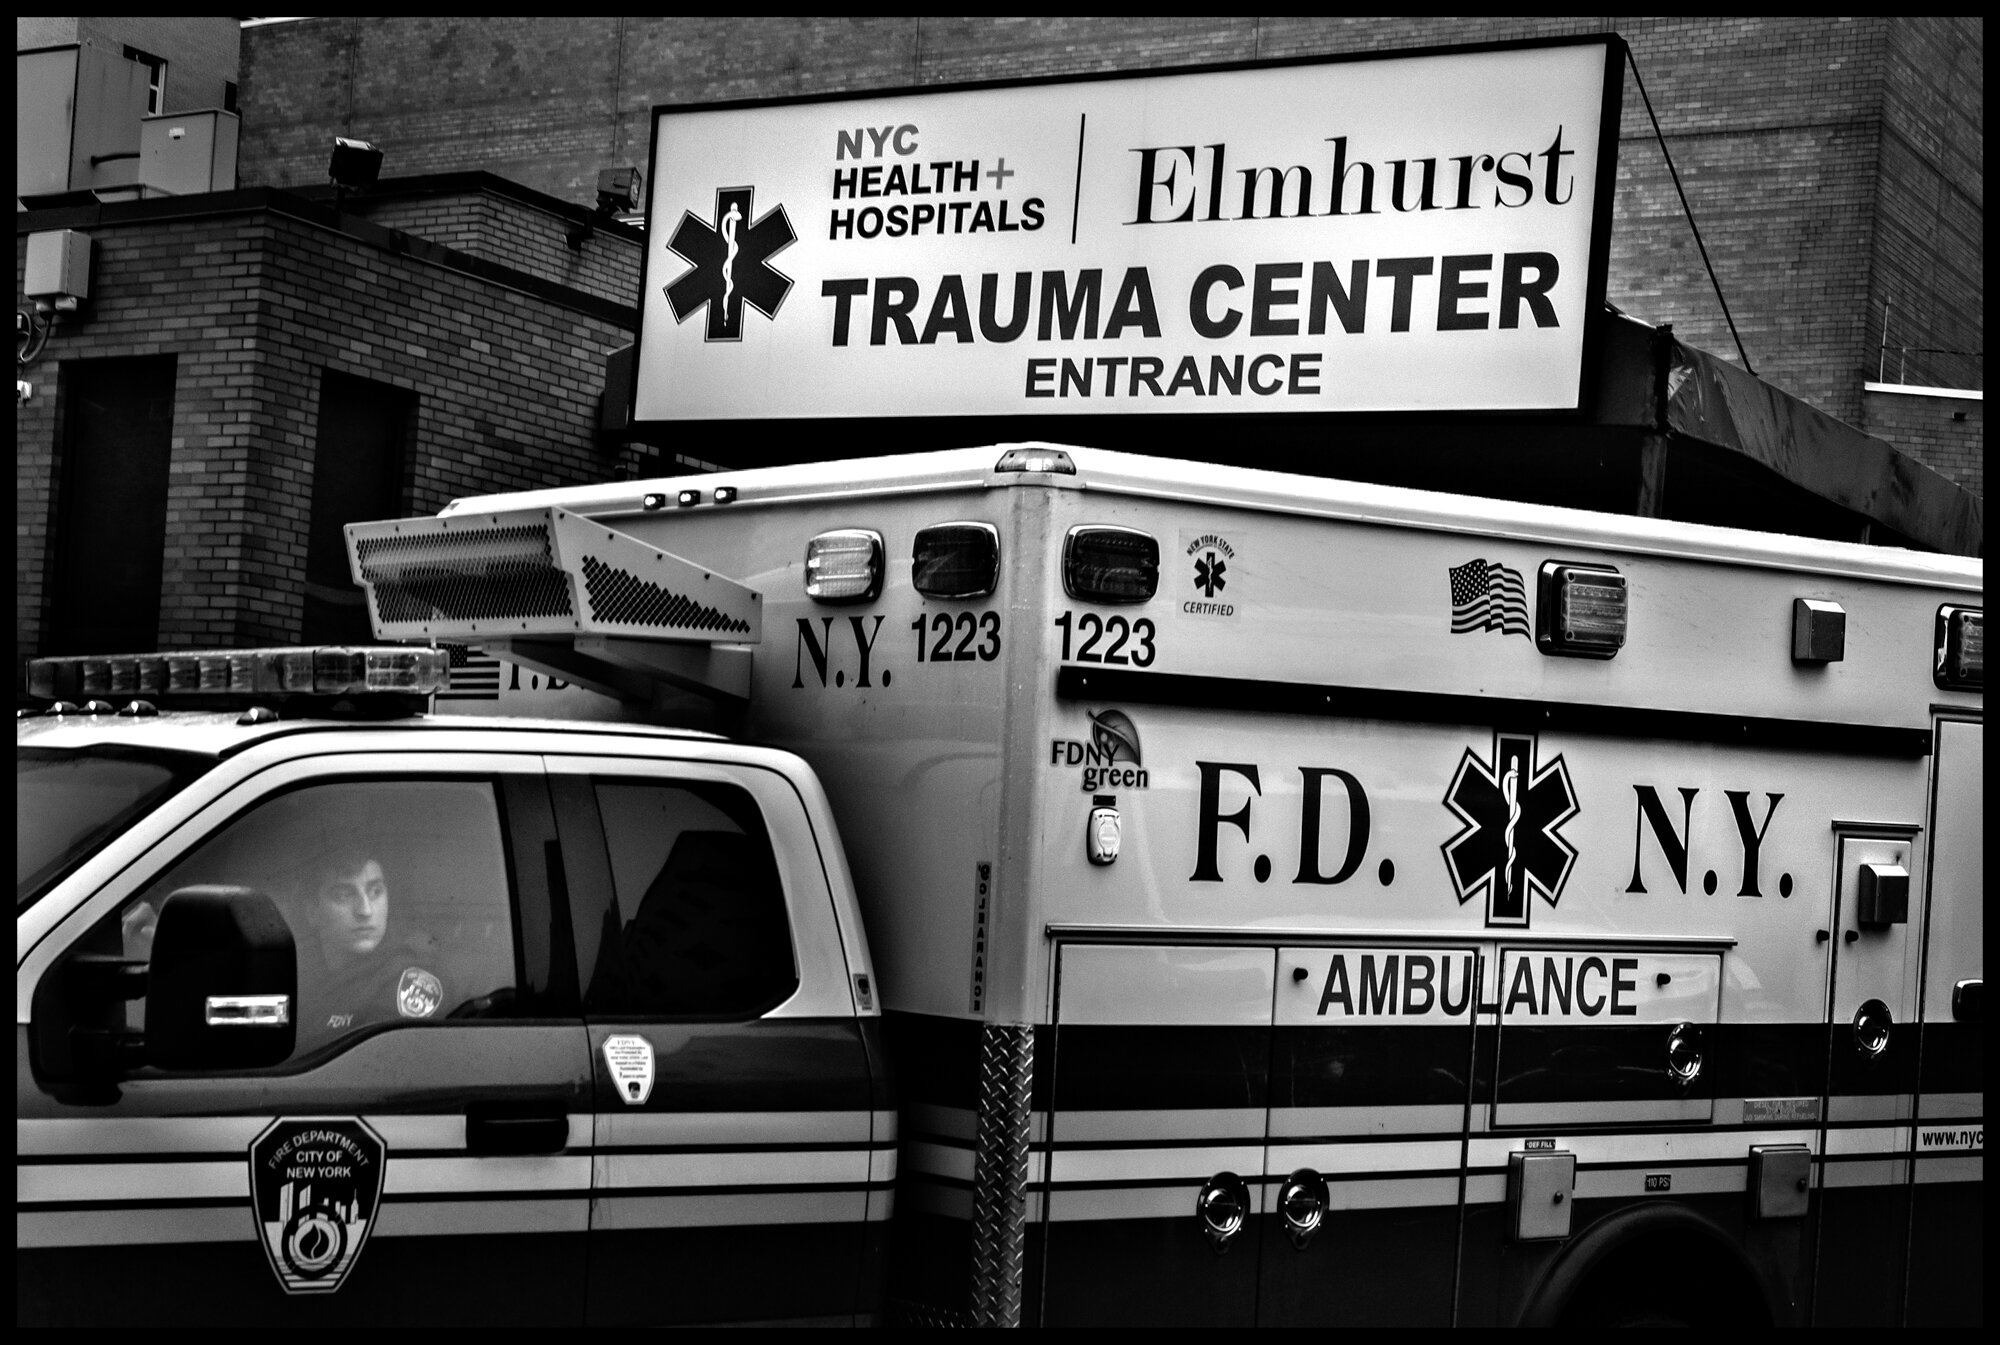  The emergency room of Elmhurst Hospital in Queens.  March 29, 2020. © Peter Turnley.   ID# 07-011 